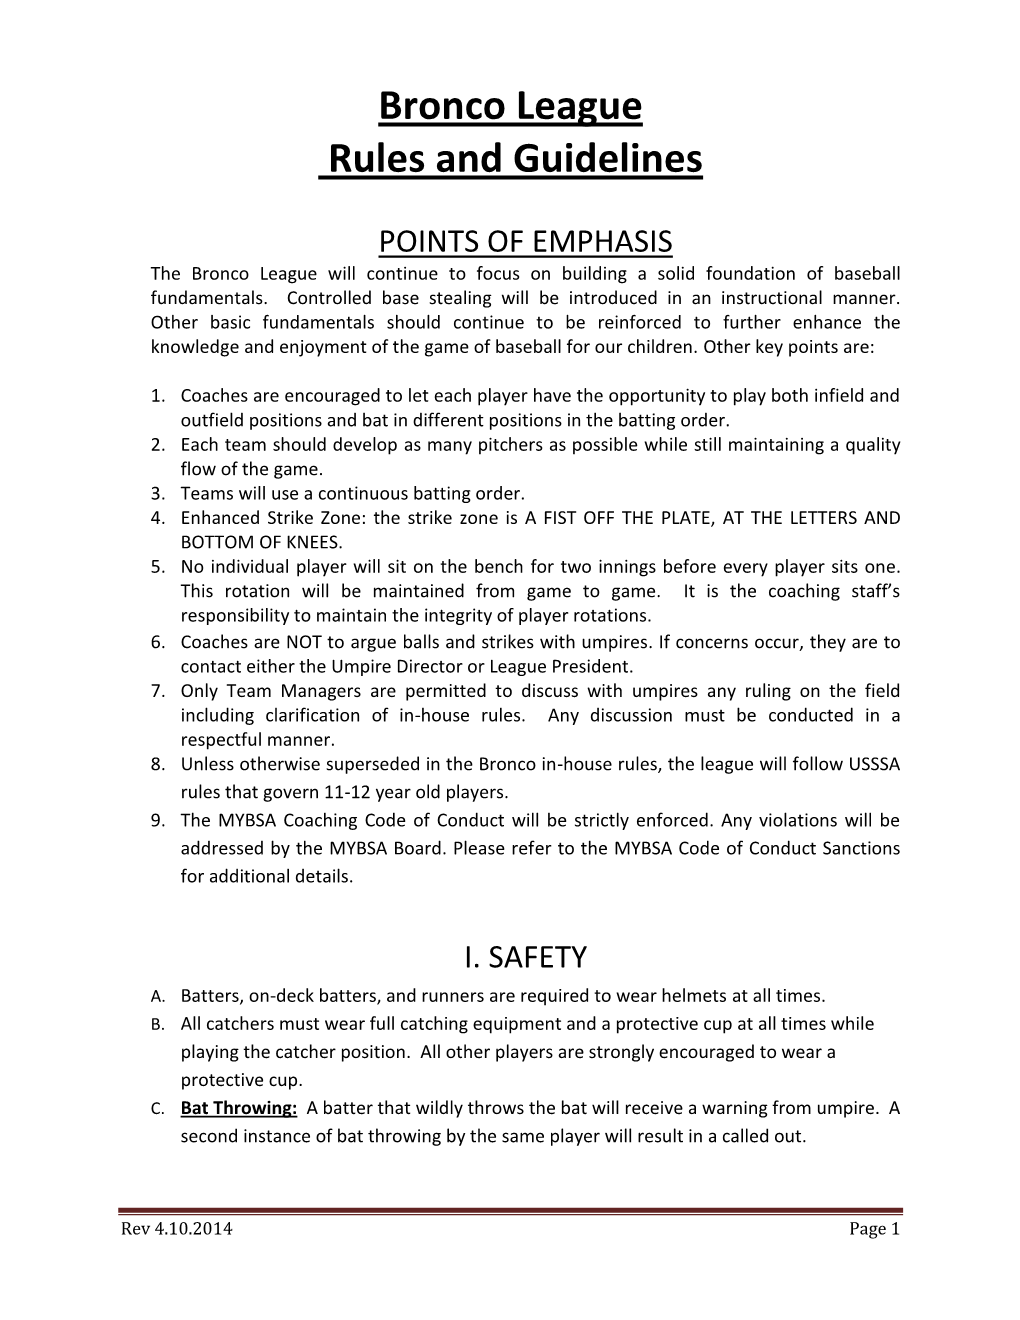 Bronco League Rules and Guidelines